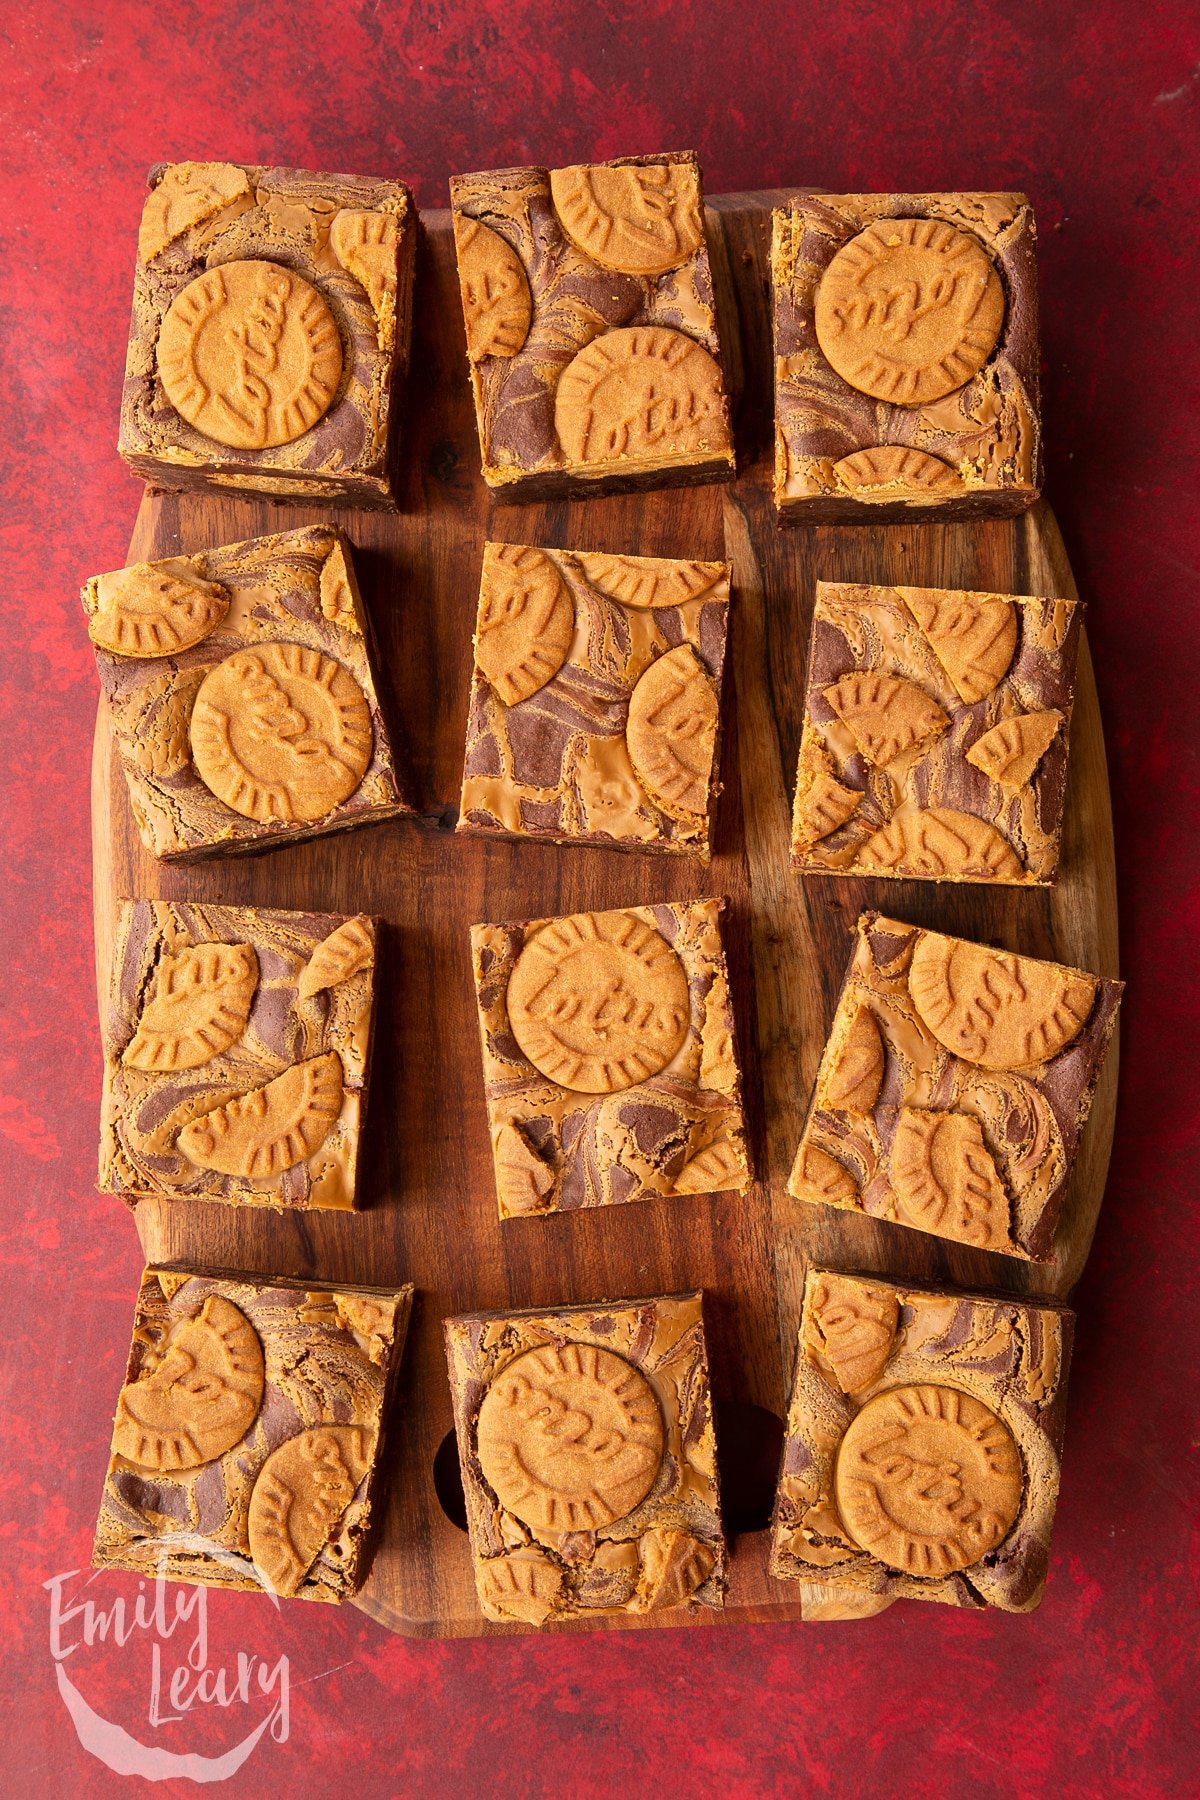 12 square Biscoff brownies neatly lined up on a wooden chopping board.